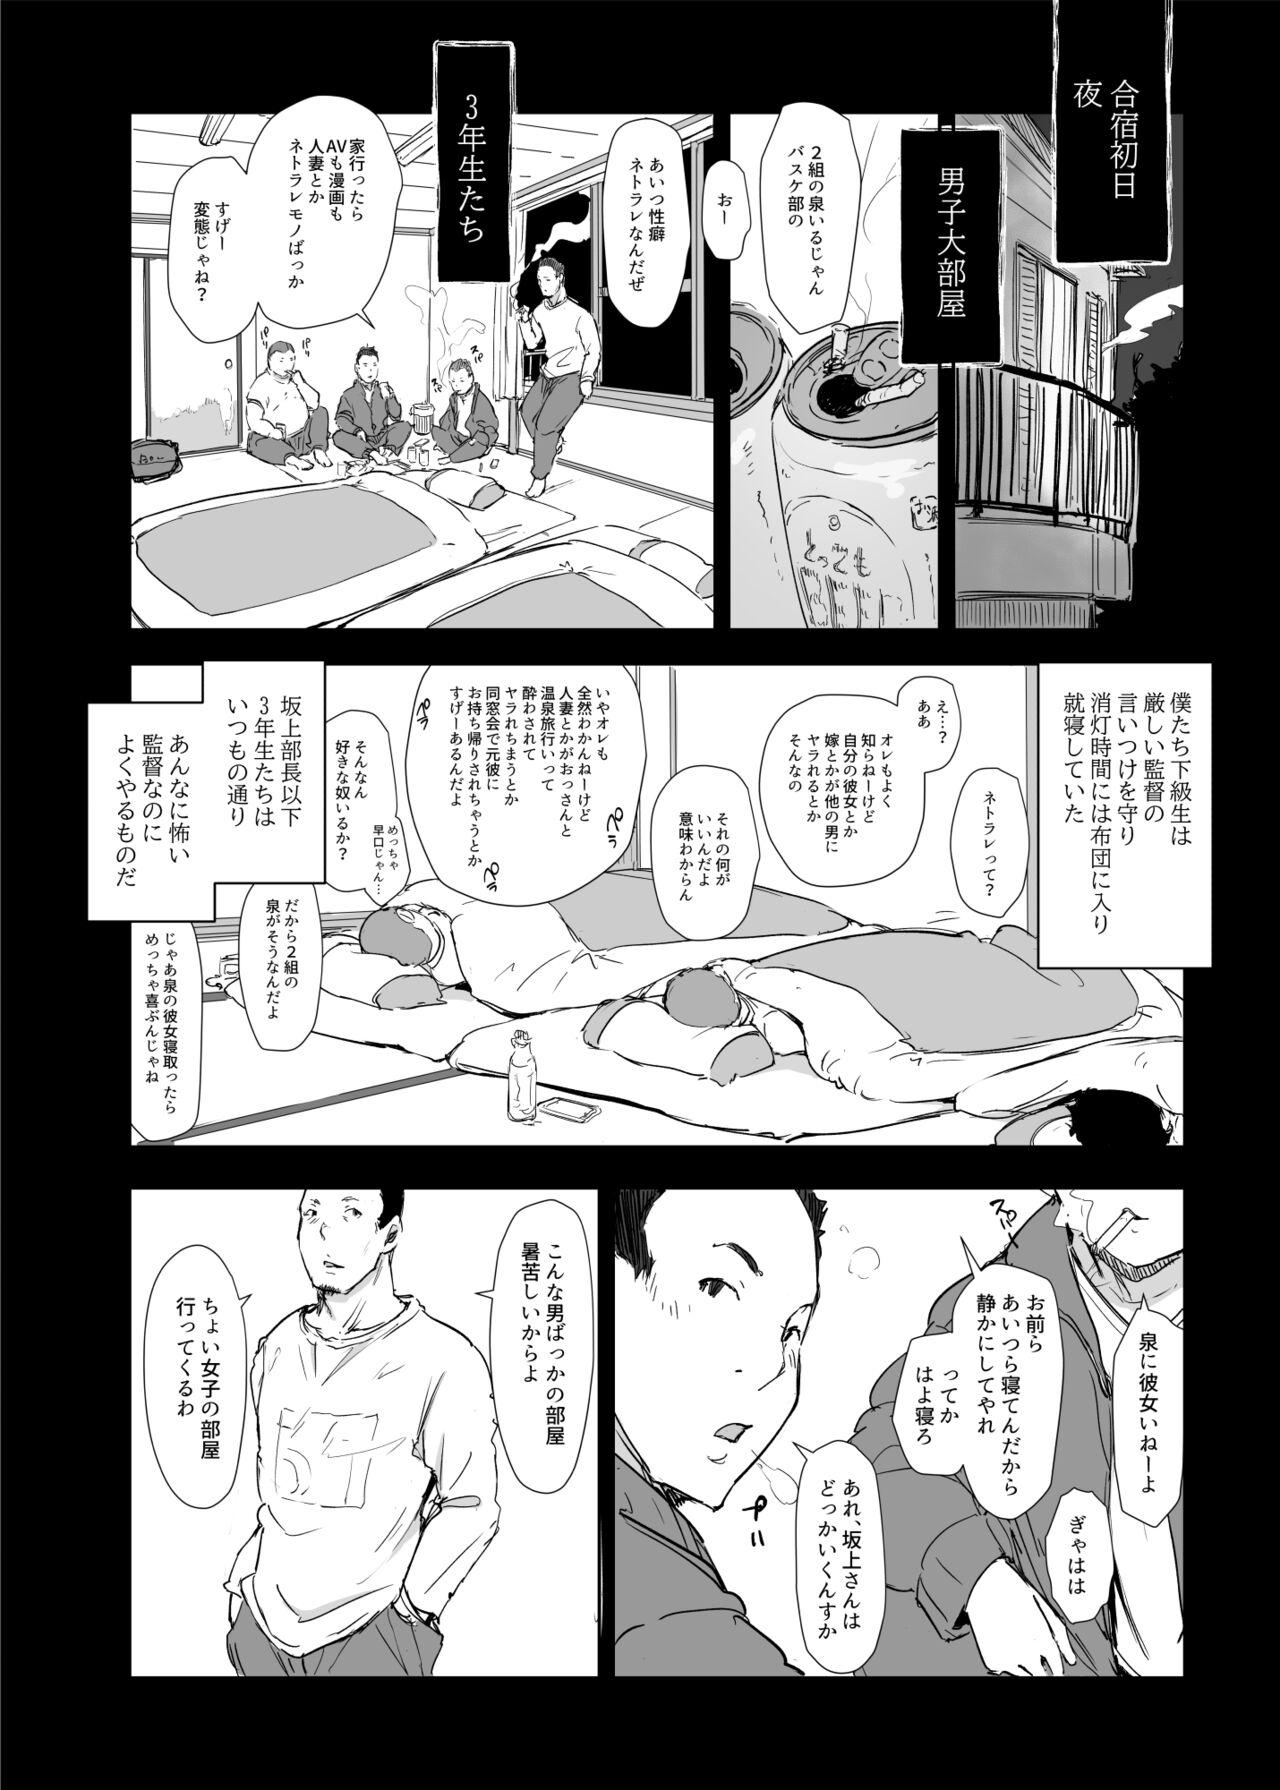 Couple Fucking 僕の彼女は野球部マネージャーver.2.2 - Original Asstomouth - Page 10